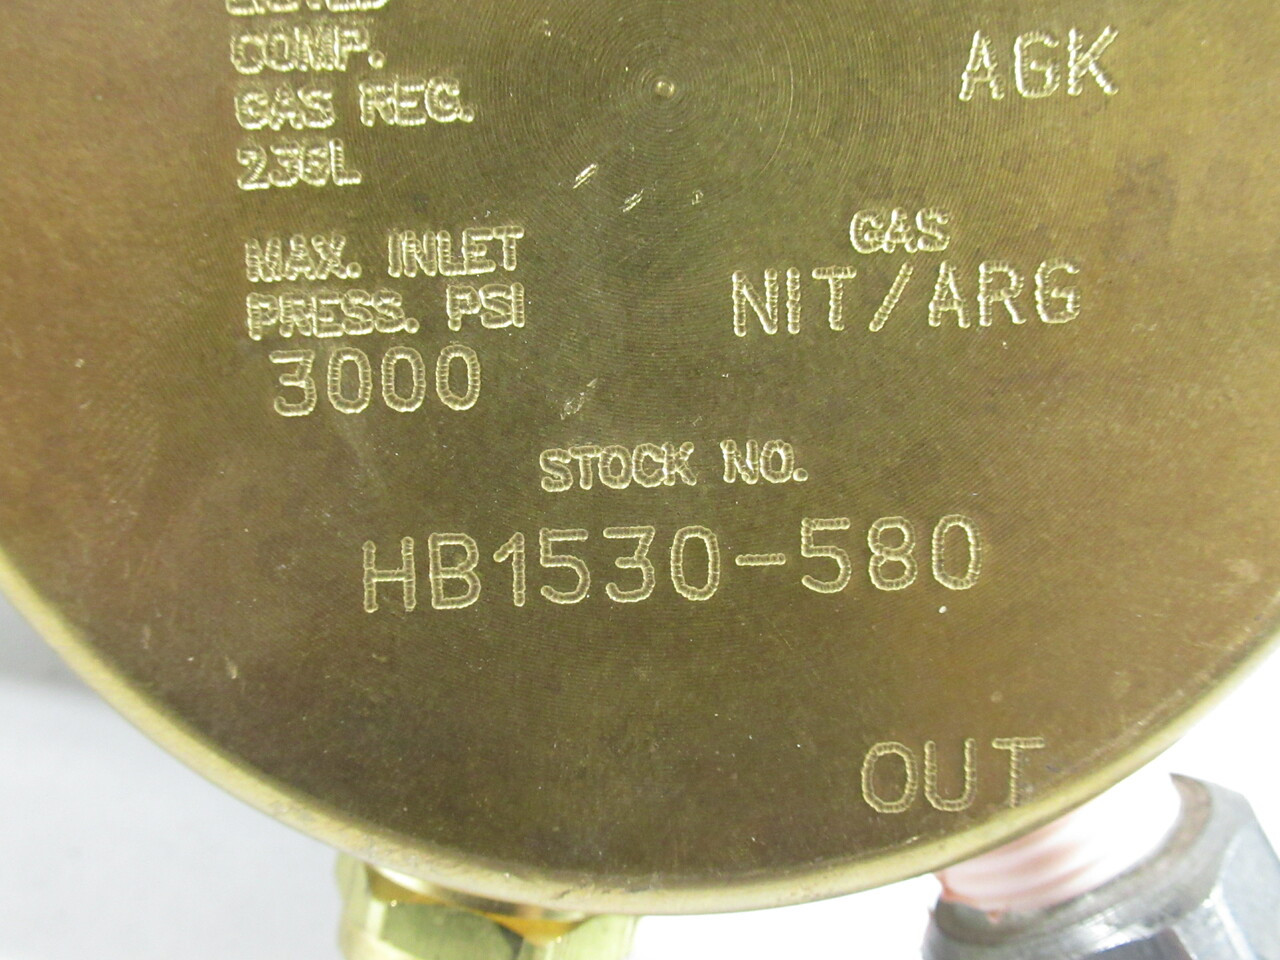 Smith HB1530-580 Regulator Assembly 3000psi USED